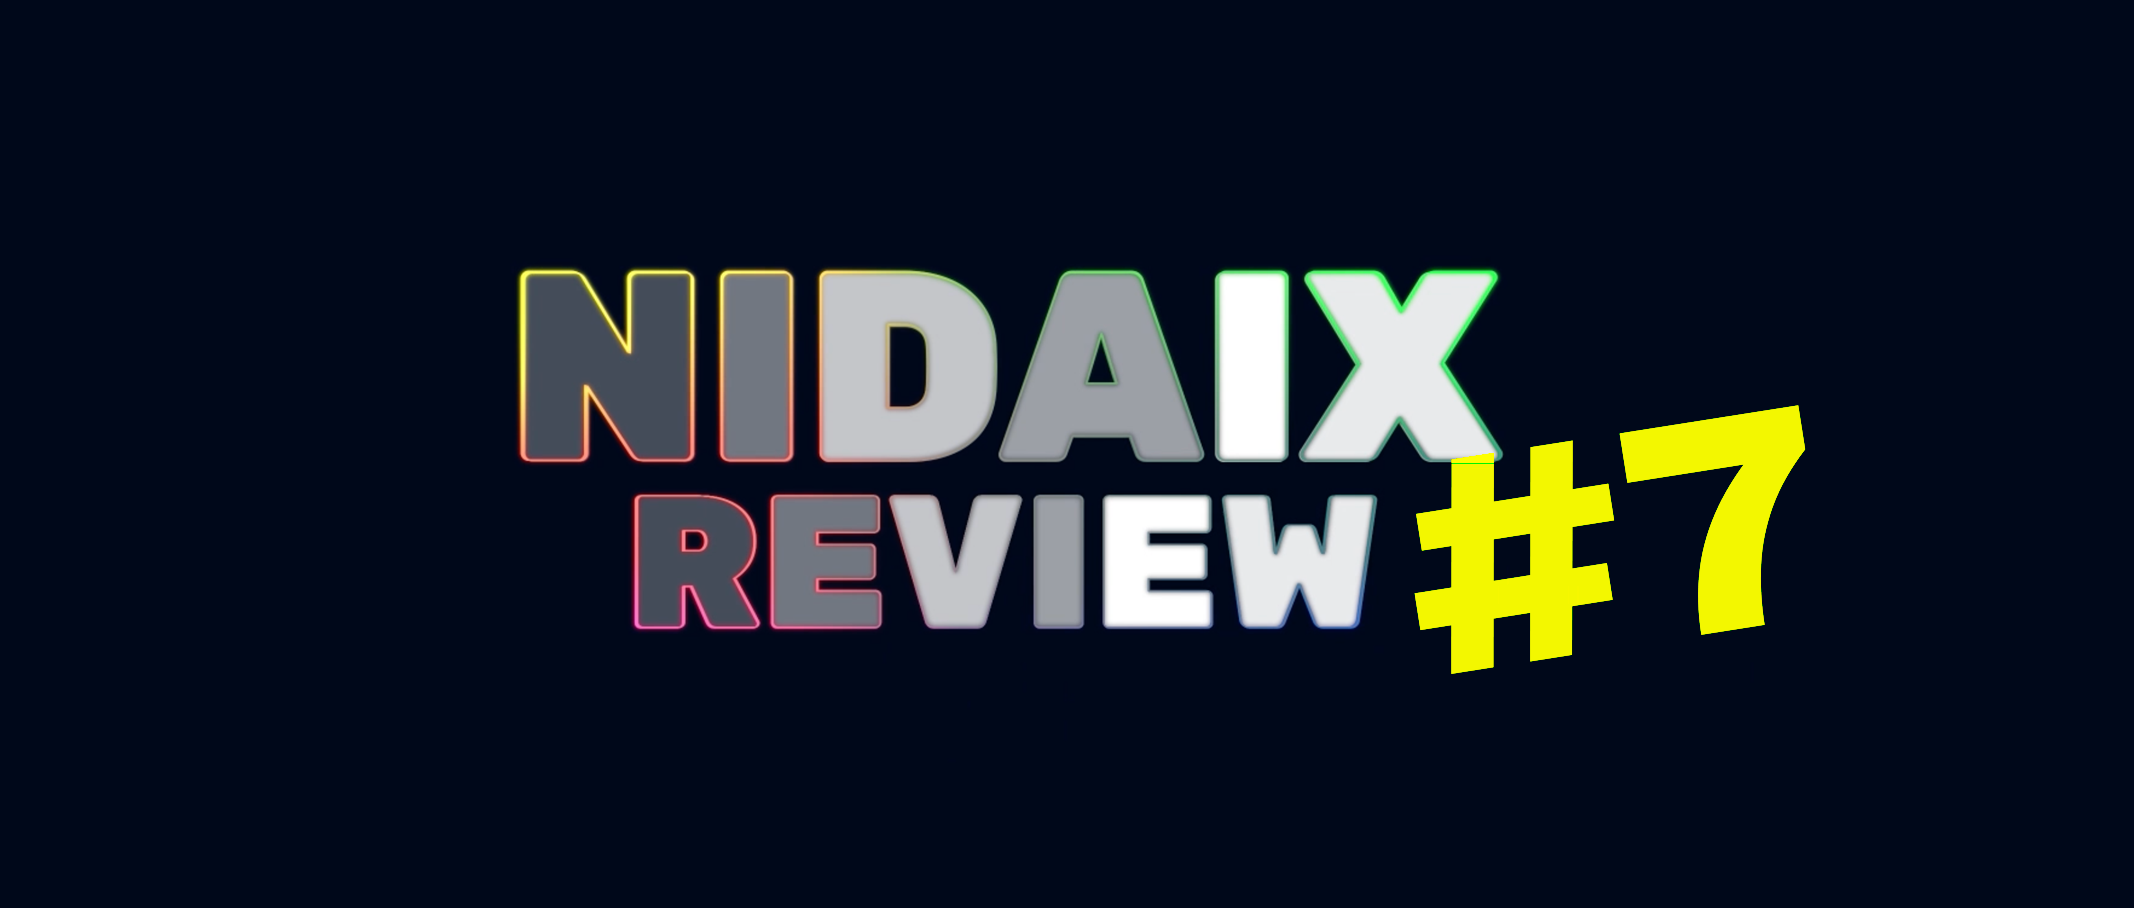 NIDAIX REVIEW #7